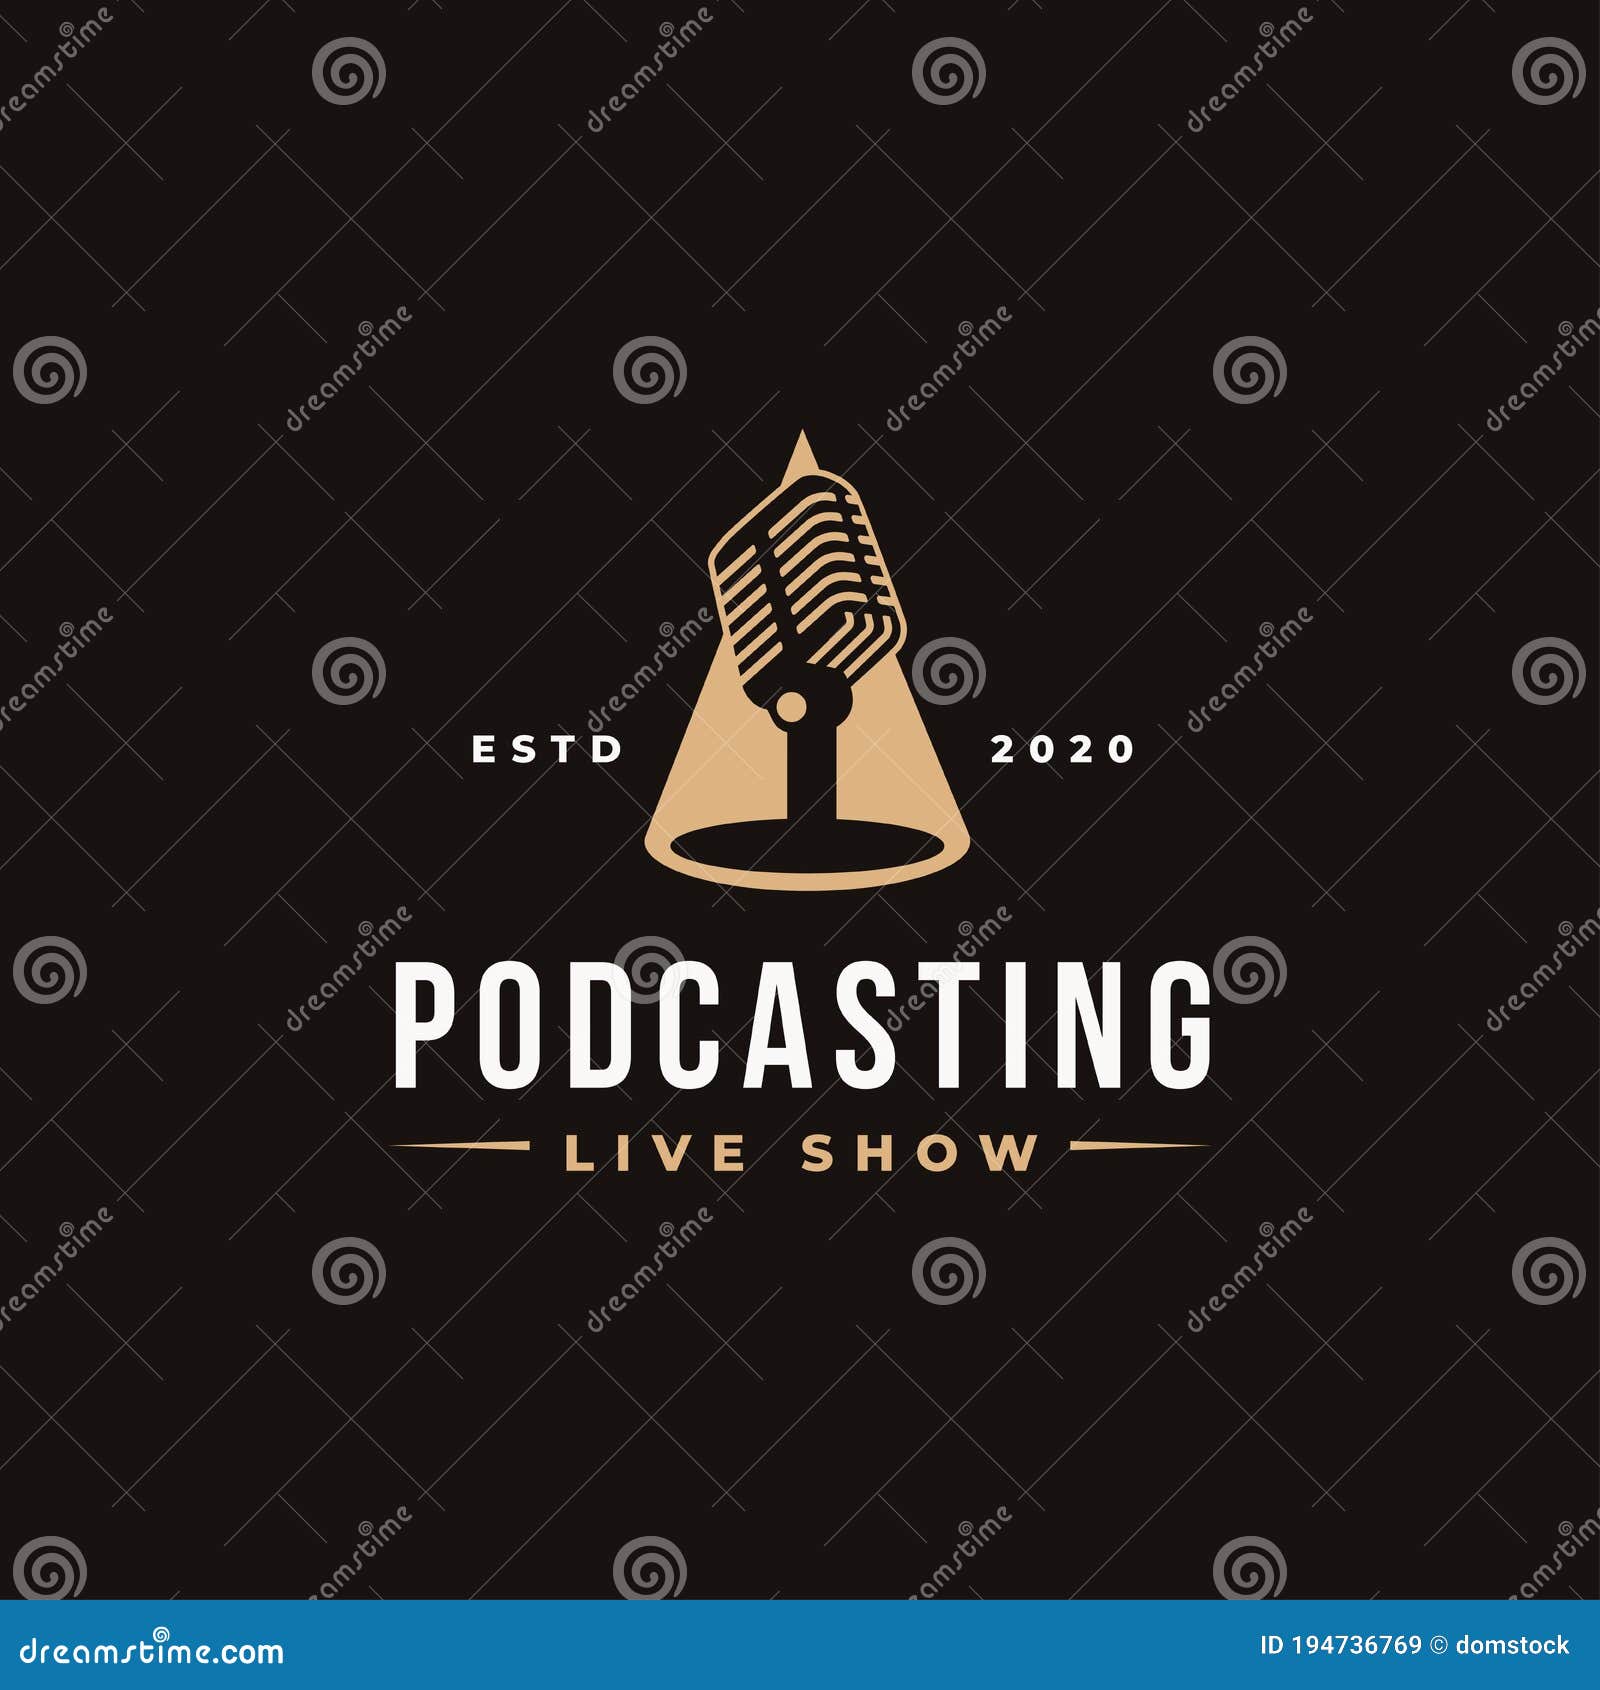 stand microphone on spotlight logo, podcasting logo icon concept